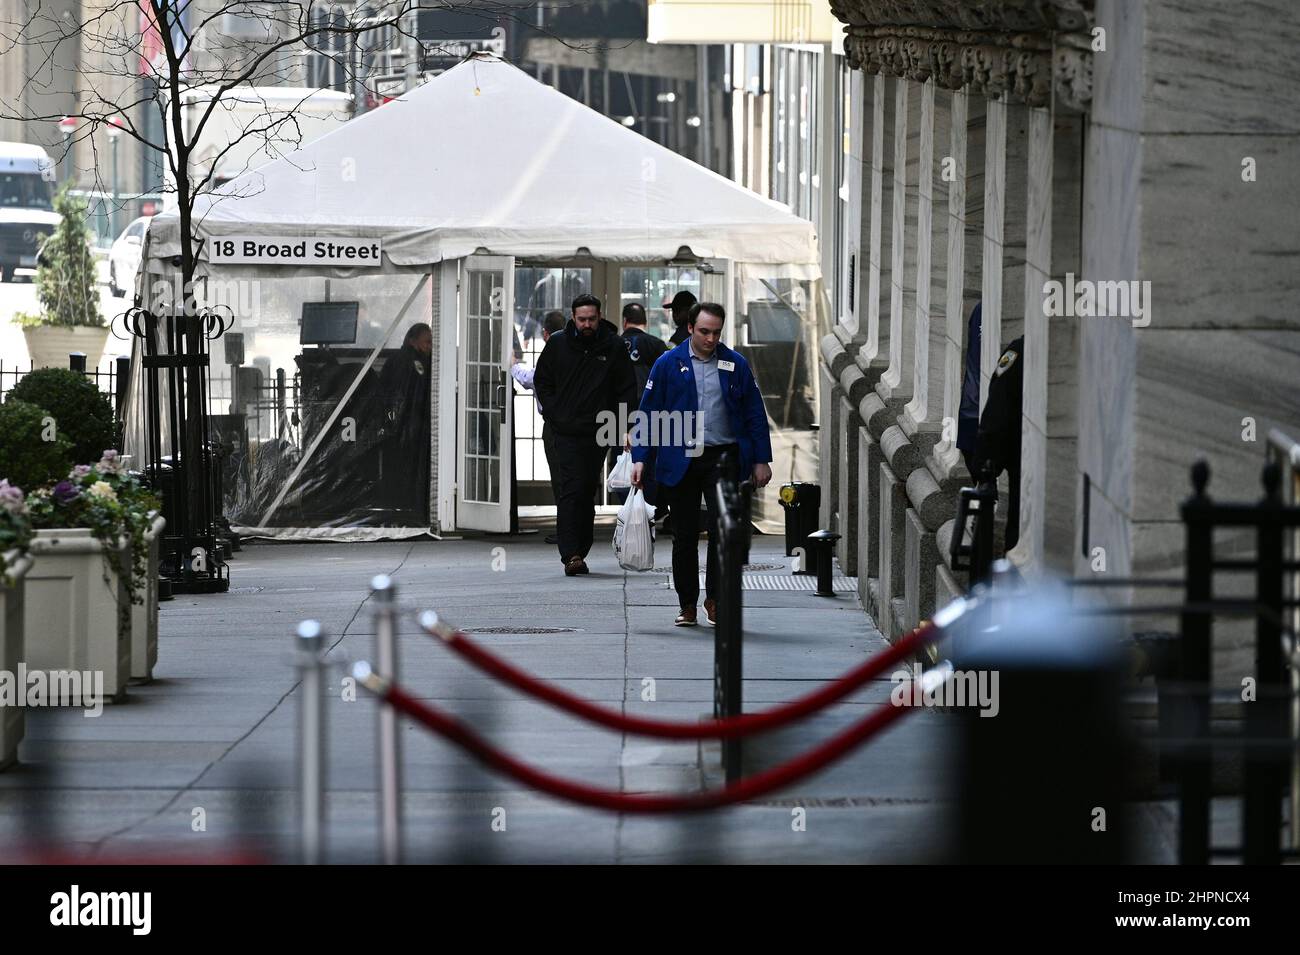 New York, USA. 22nd Feb, 2022. Traders are seen passing through a security tent as they return to the New York Stock Exchange as the DOW reacts to the news that Russian President Vladimir Putin ordered troops into Ukraine, New York, NY, February 22, 2022. Stocks tumbled as crude oil price surged while the United States and its allies announced economic sanctions against Russia for its incursion into Ukraine. (Photo by Anthony Behar/Sipa USA) Credit: Sipa USA/Alamy Live News Stock Photo